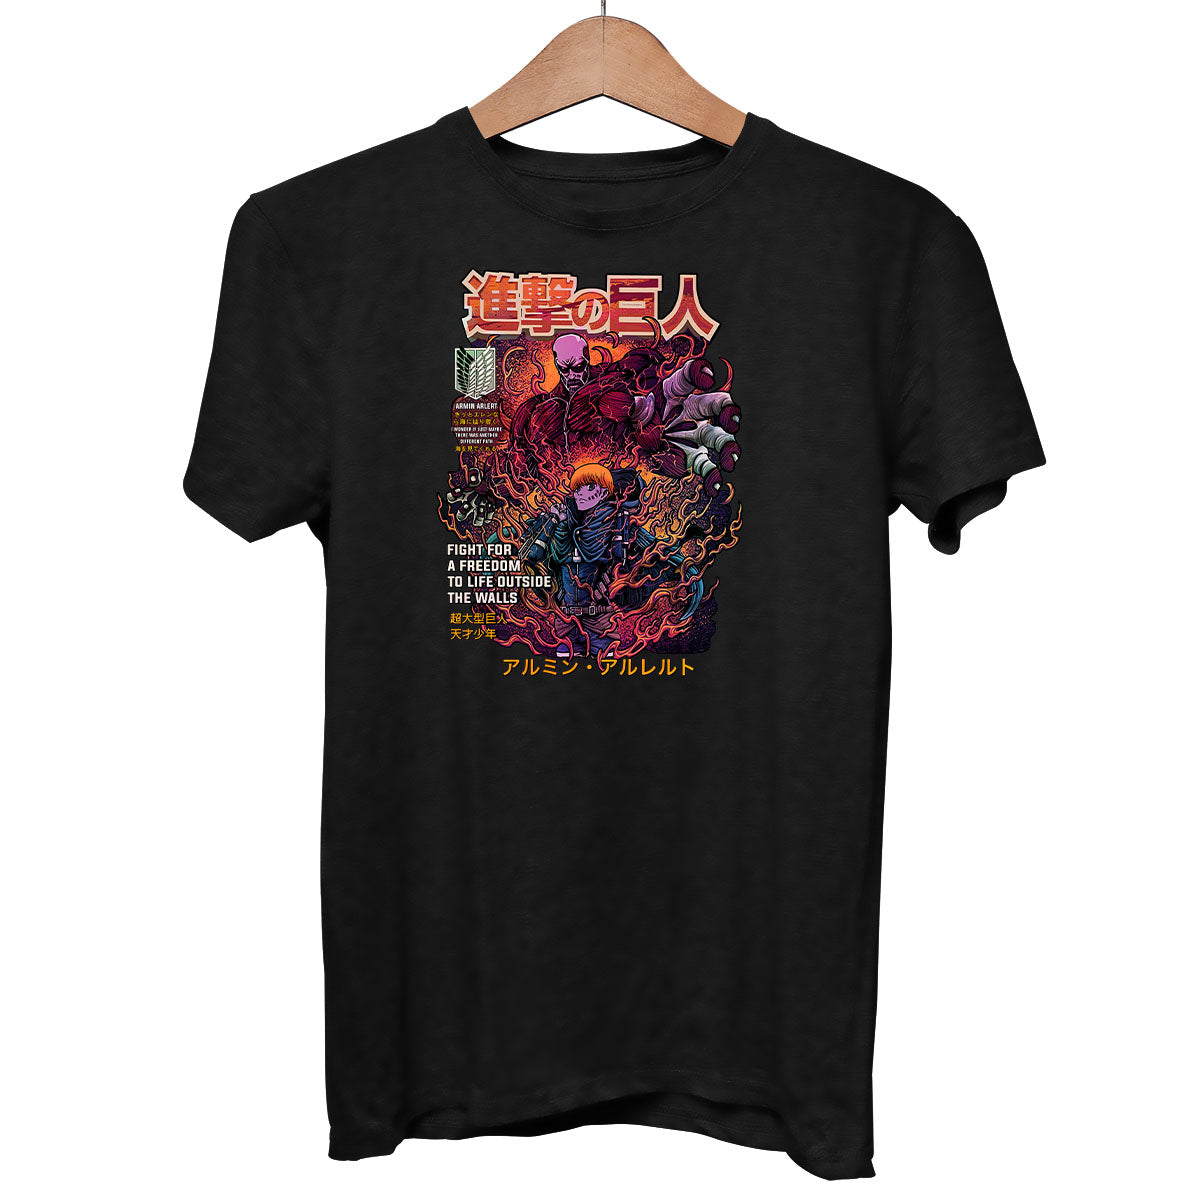 Attack On Titan Anime Fight For A Freedom To Life Outside The Walls Adult Unisex Black Tee